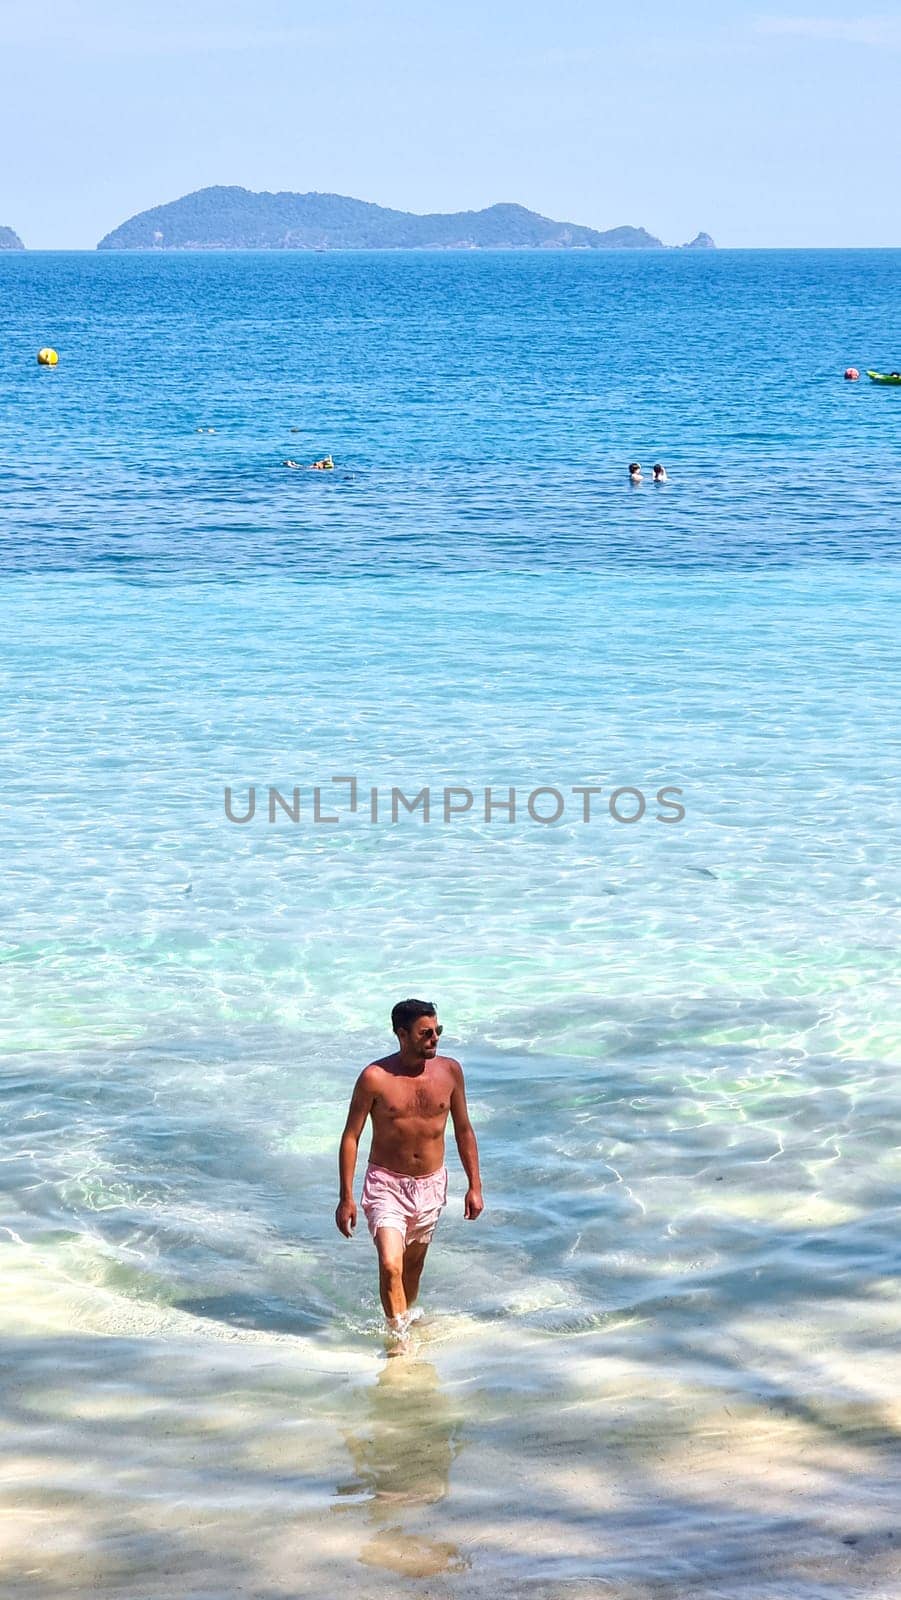 A man with a rugged appearance walks gracefully out of the glistening ocean water, the droplets sparkle in the sunlight as he emerges onto the sandy beach by fokkebok